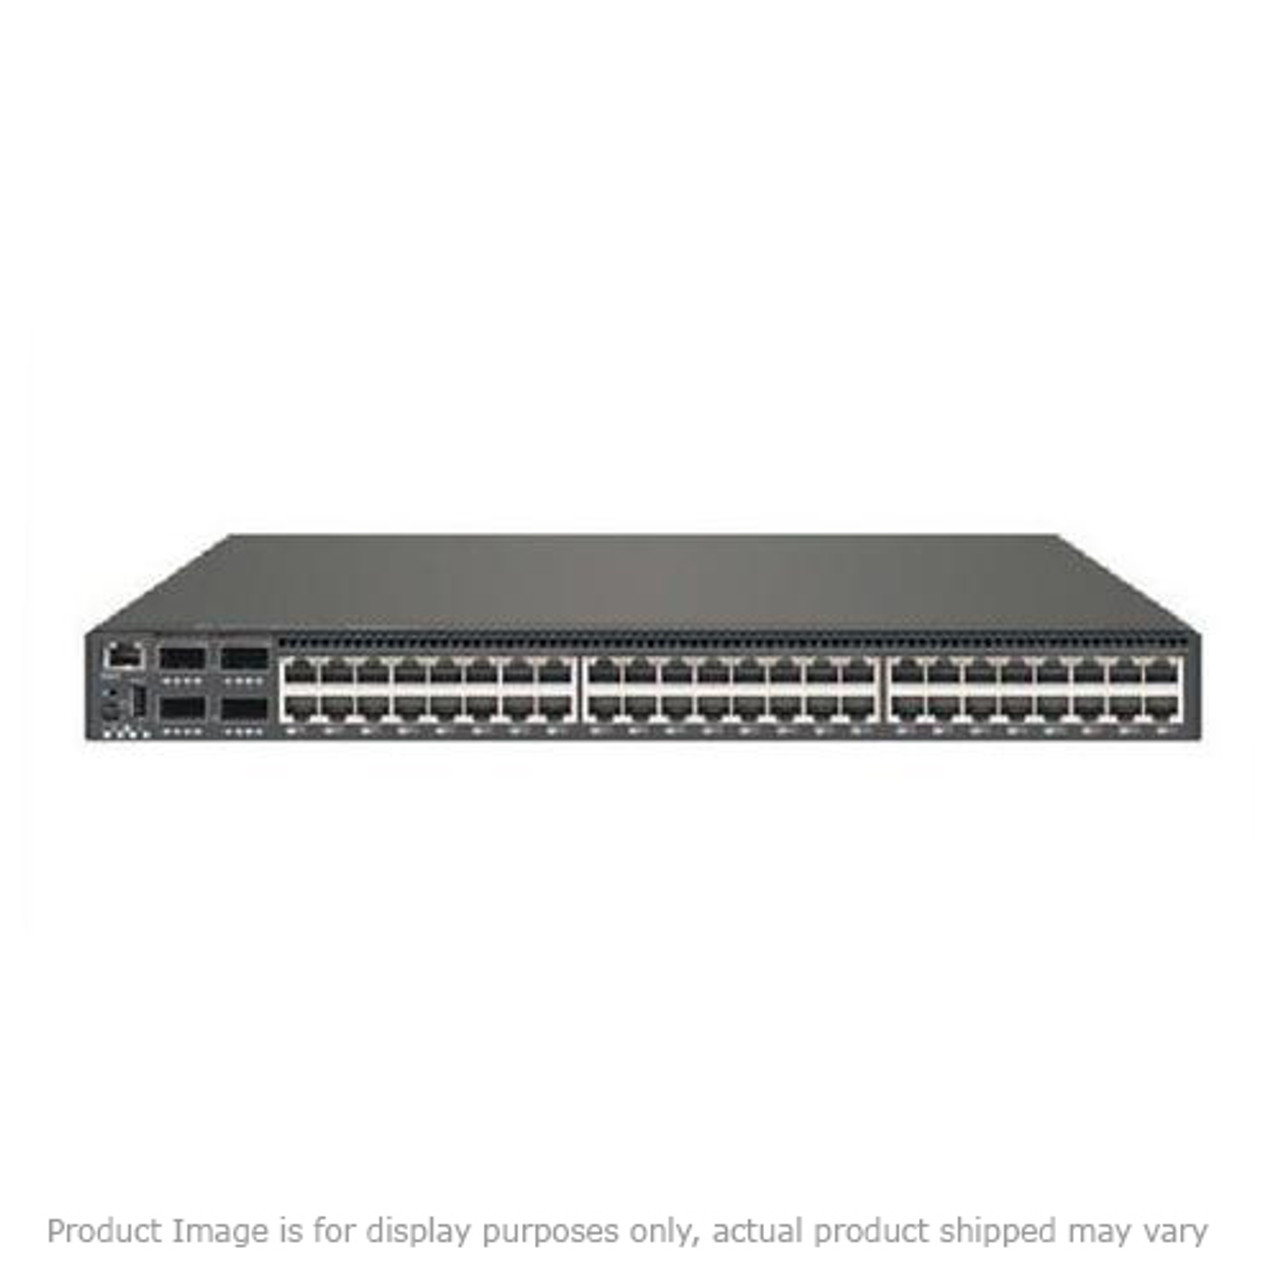 FAB0535Y040 Cisco Catalyst 2942M-XL 24-Ports 10/100 Autosensing Switch with 2x Expansion Slots (Refurbished)